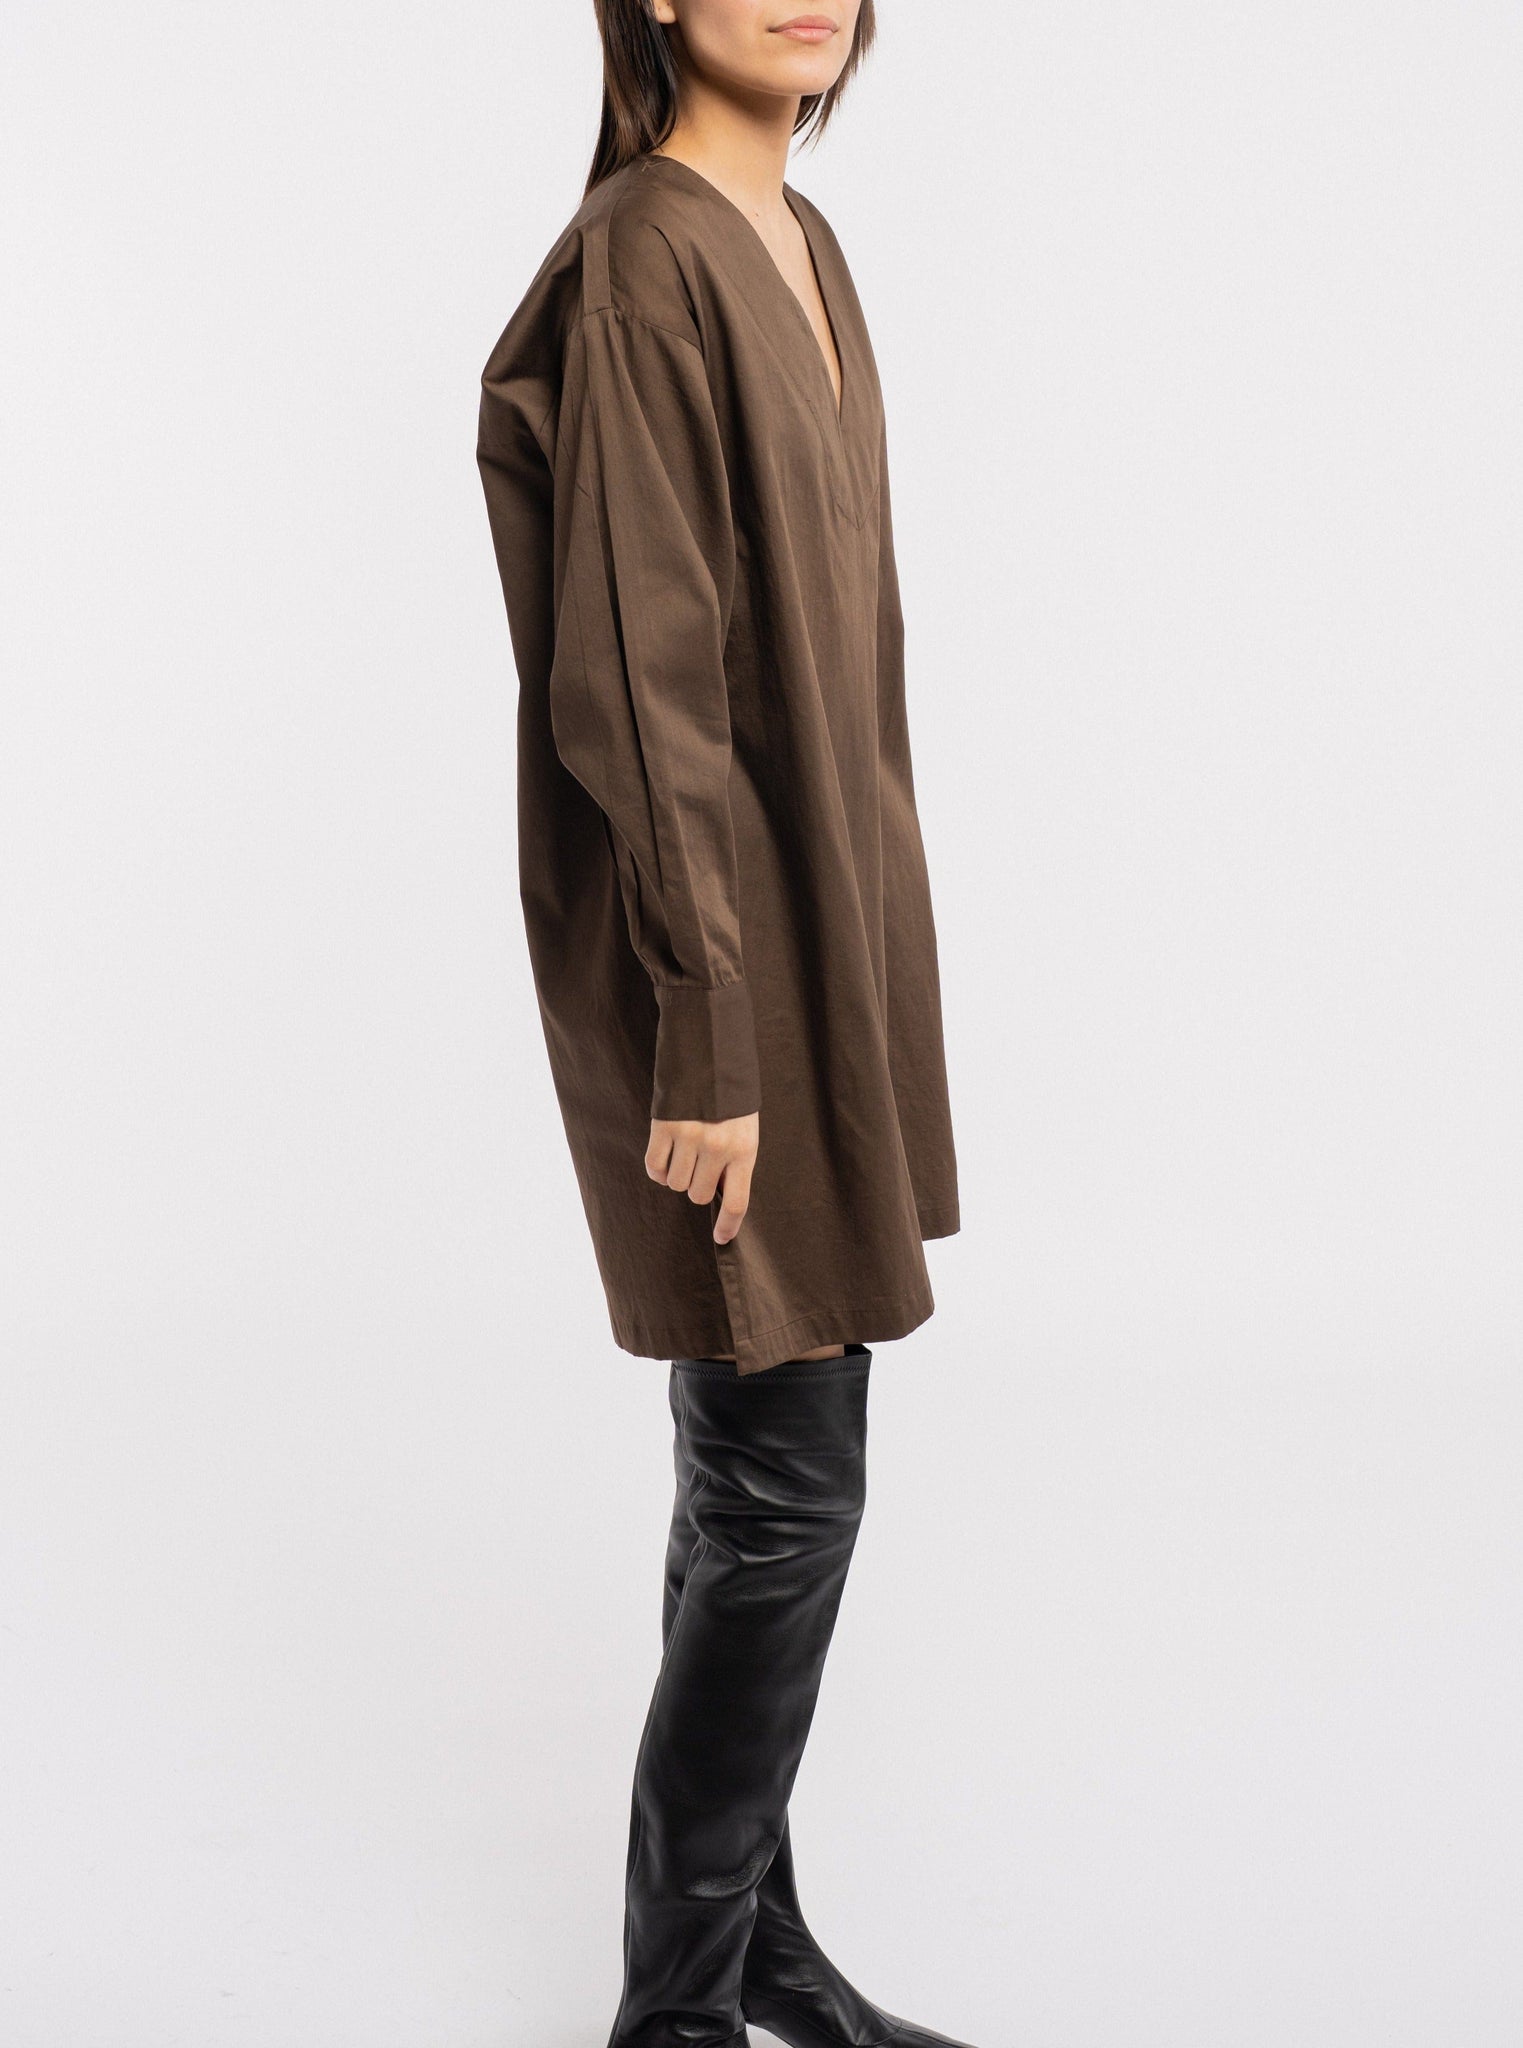 The model is wearing a Modern Tunic Dress - Basalt Brown made of organic cotton, handmade in India.